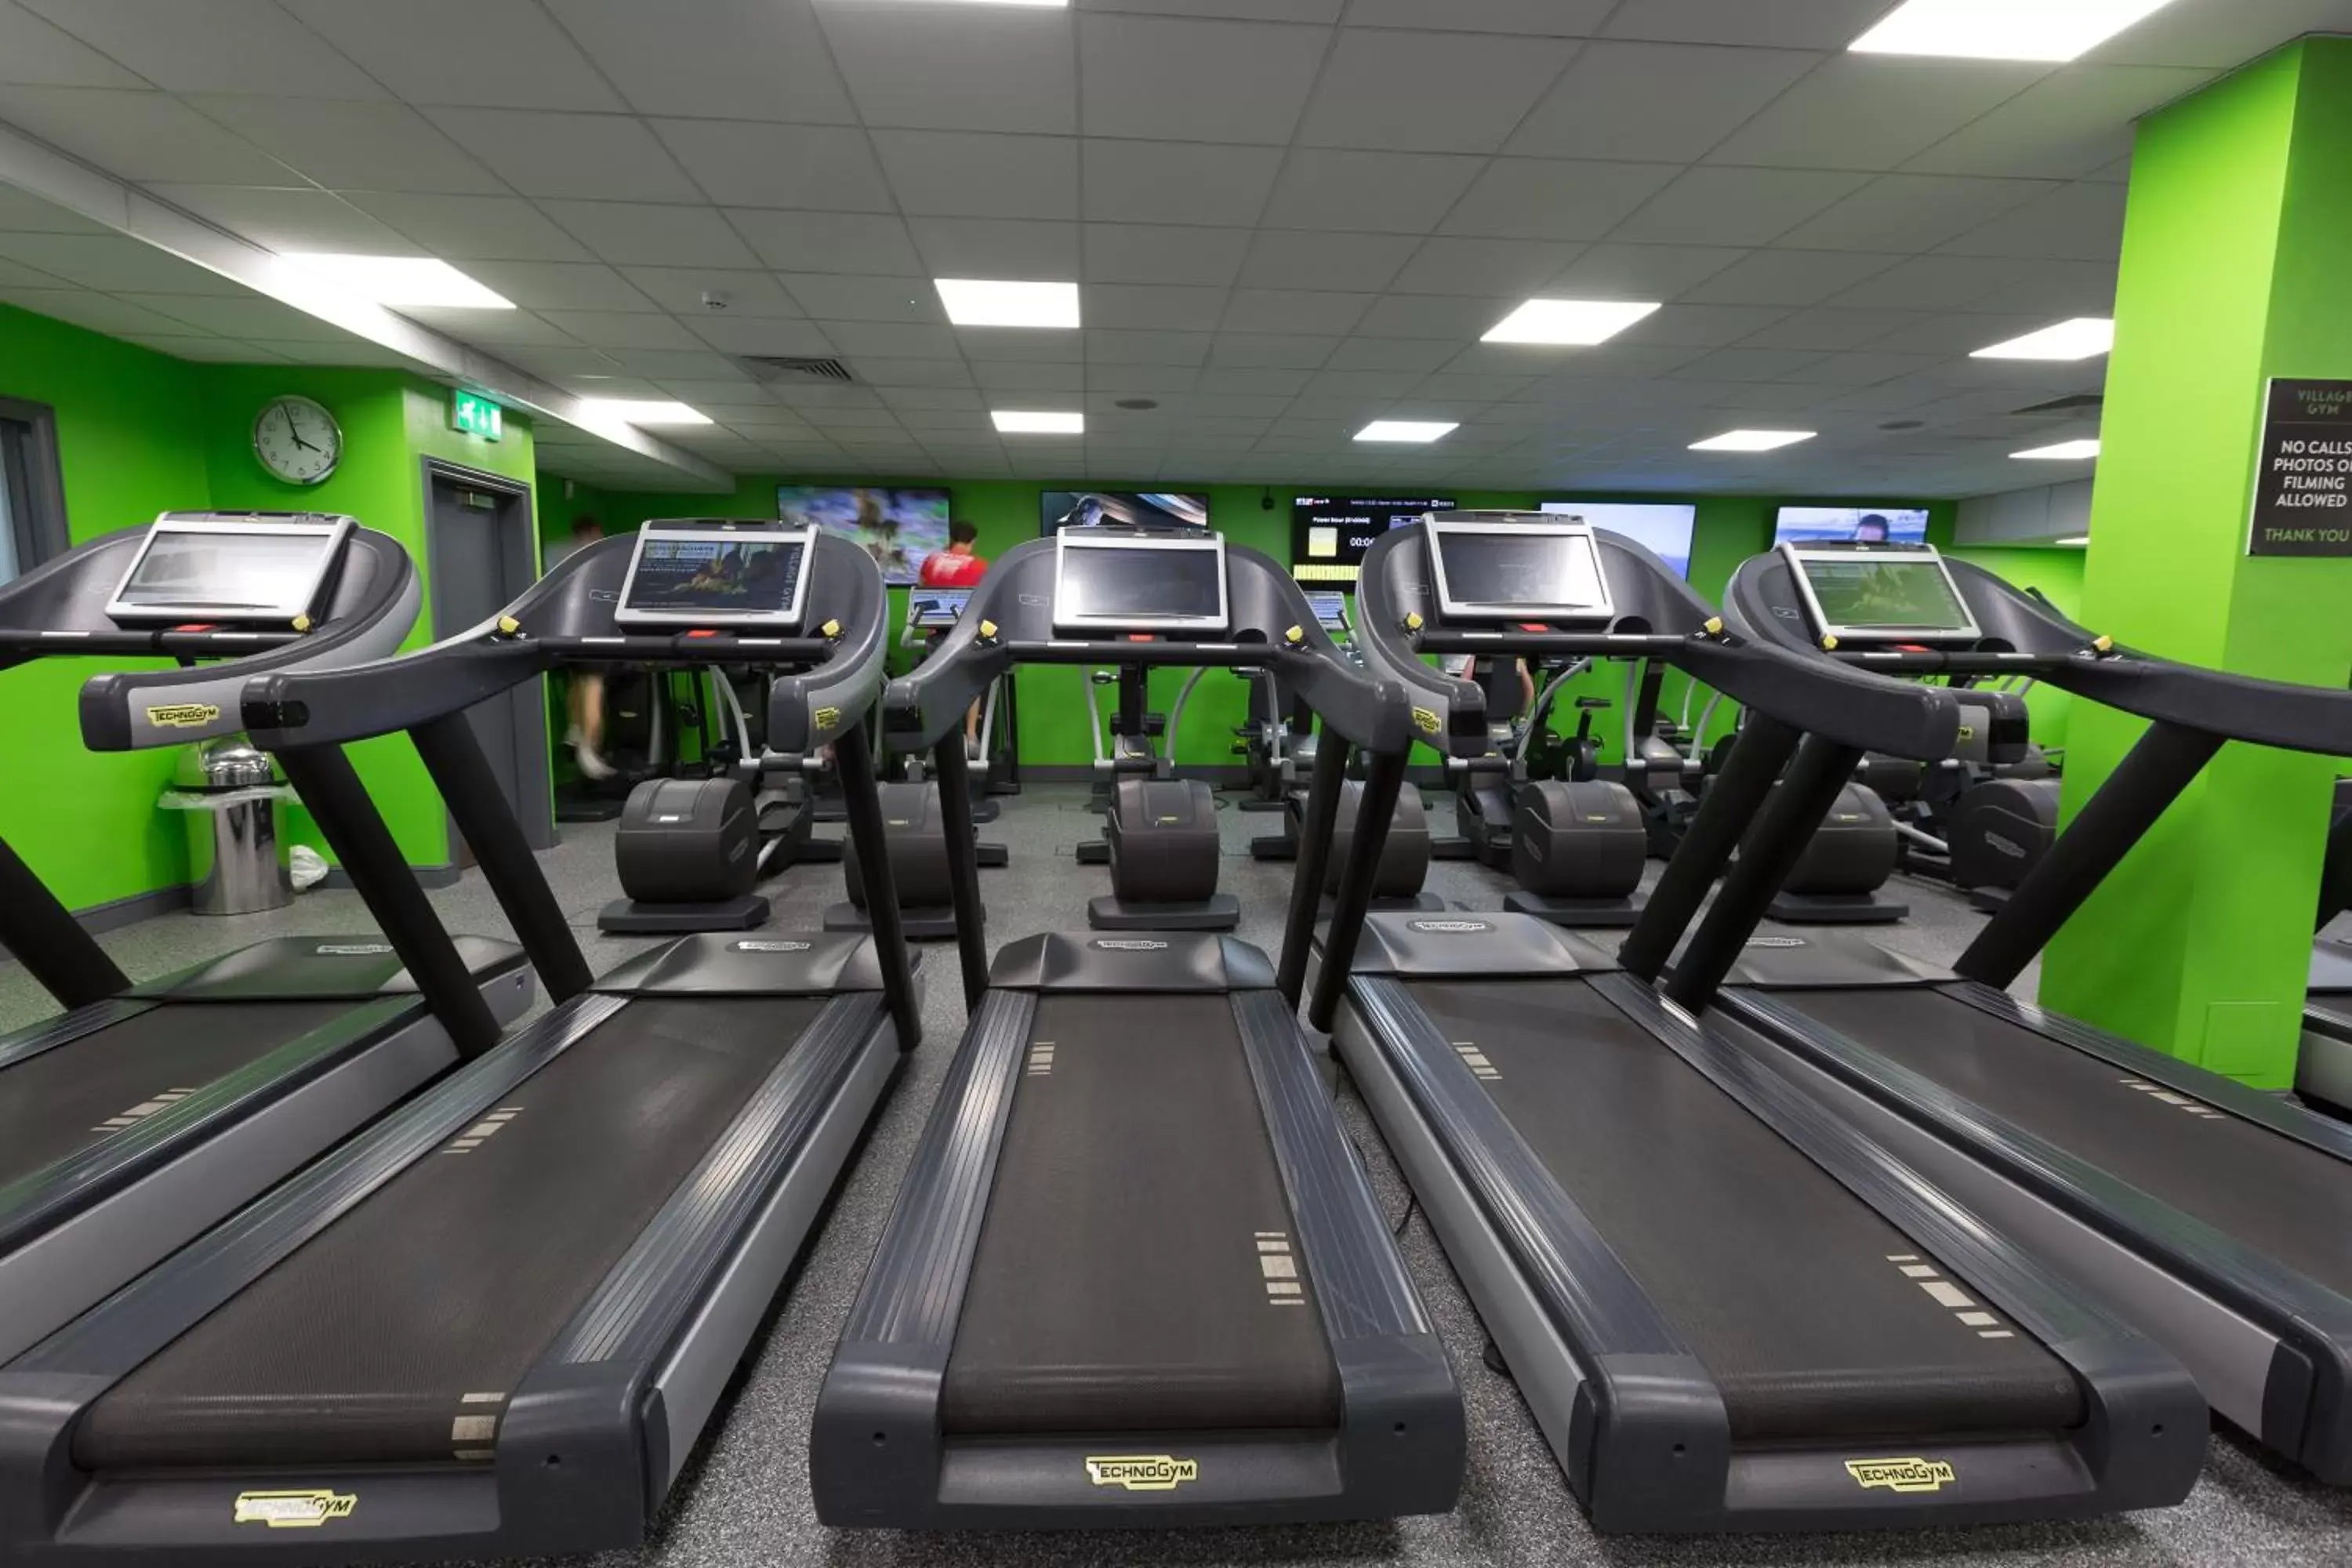 Fitness centre/facilities, Fitness Center/Facilities in Village Hotel Manchester Bury